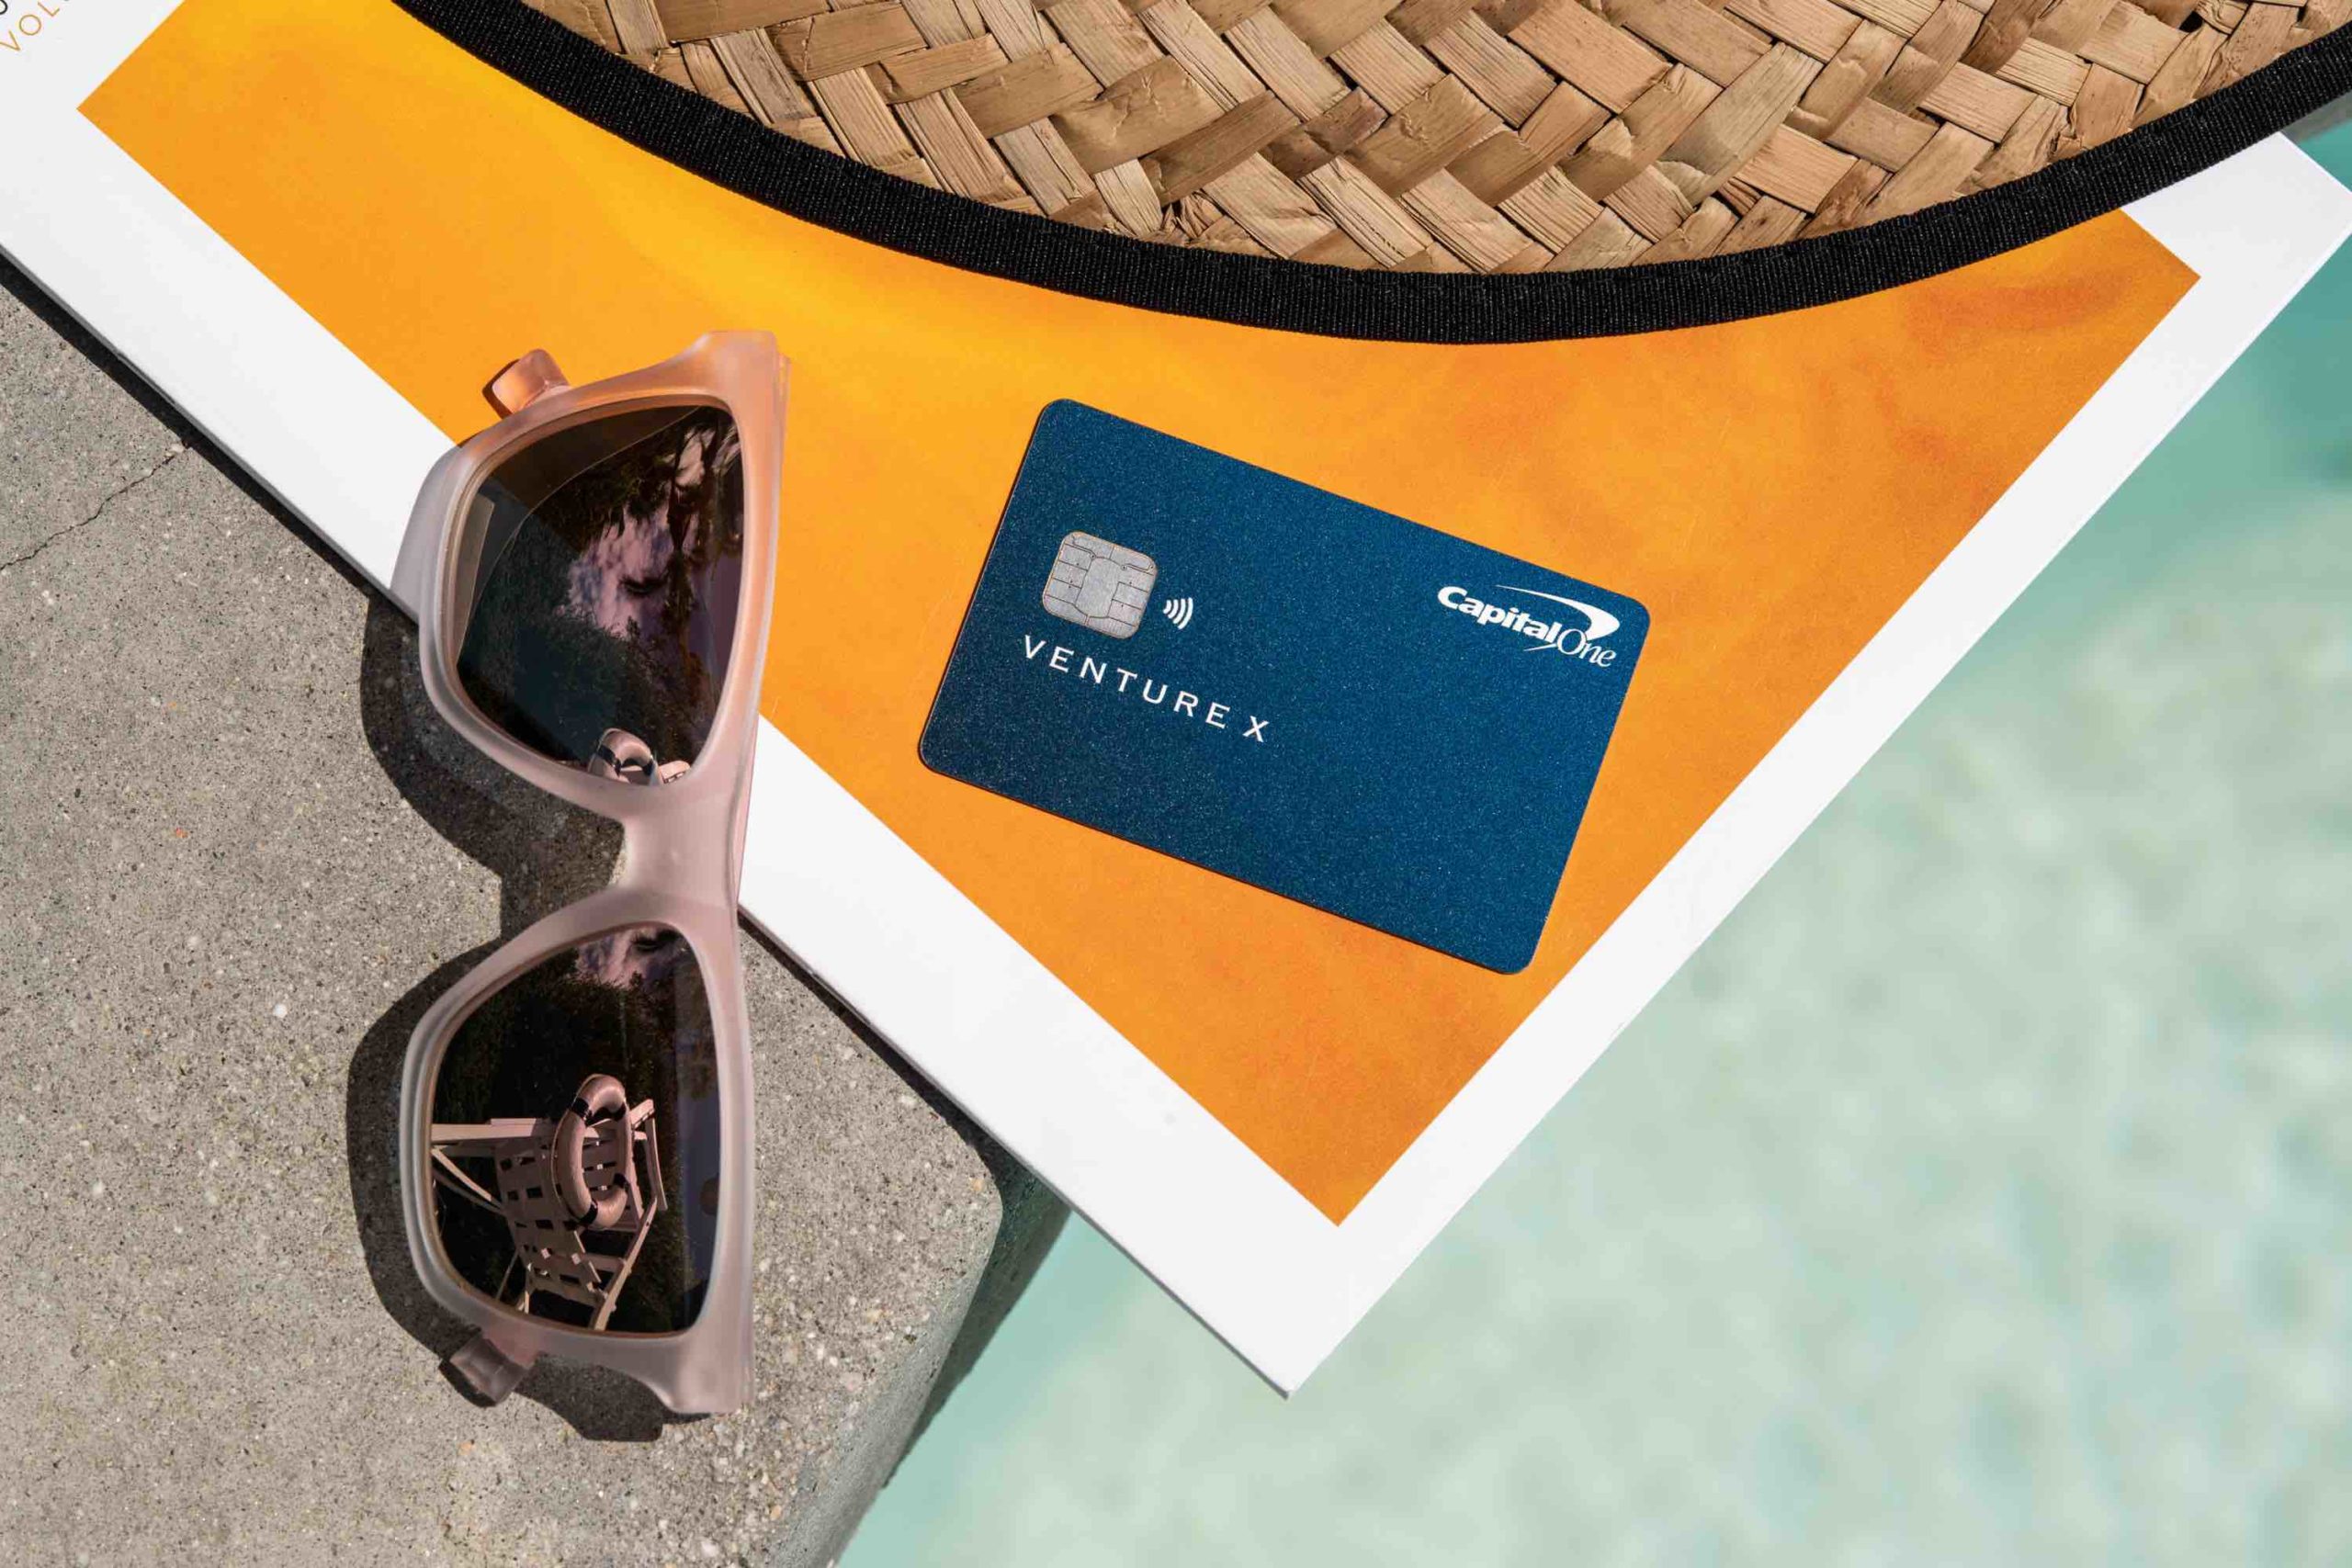 Capital One Makes Changes to Venture X $300 Travel Credit